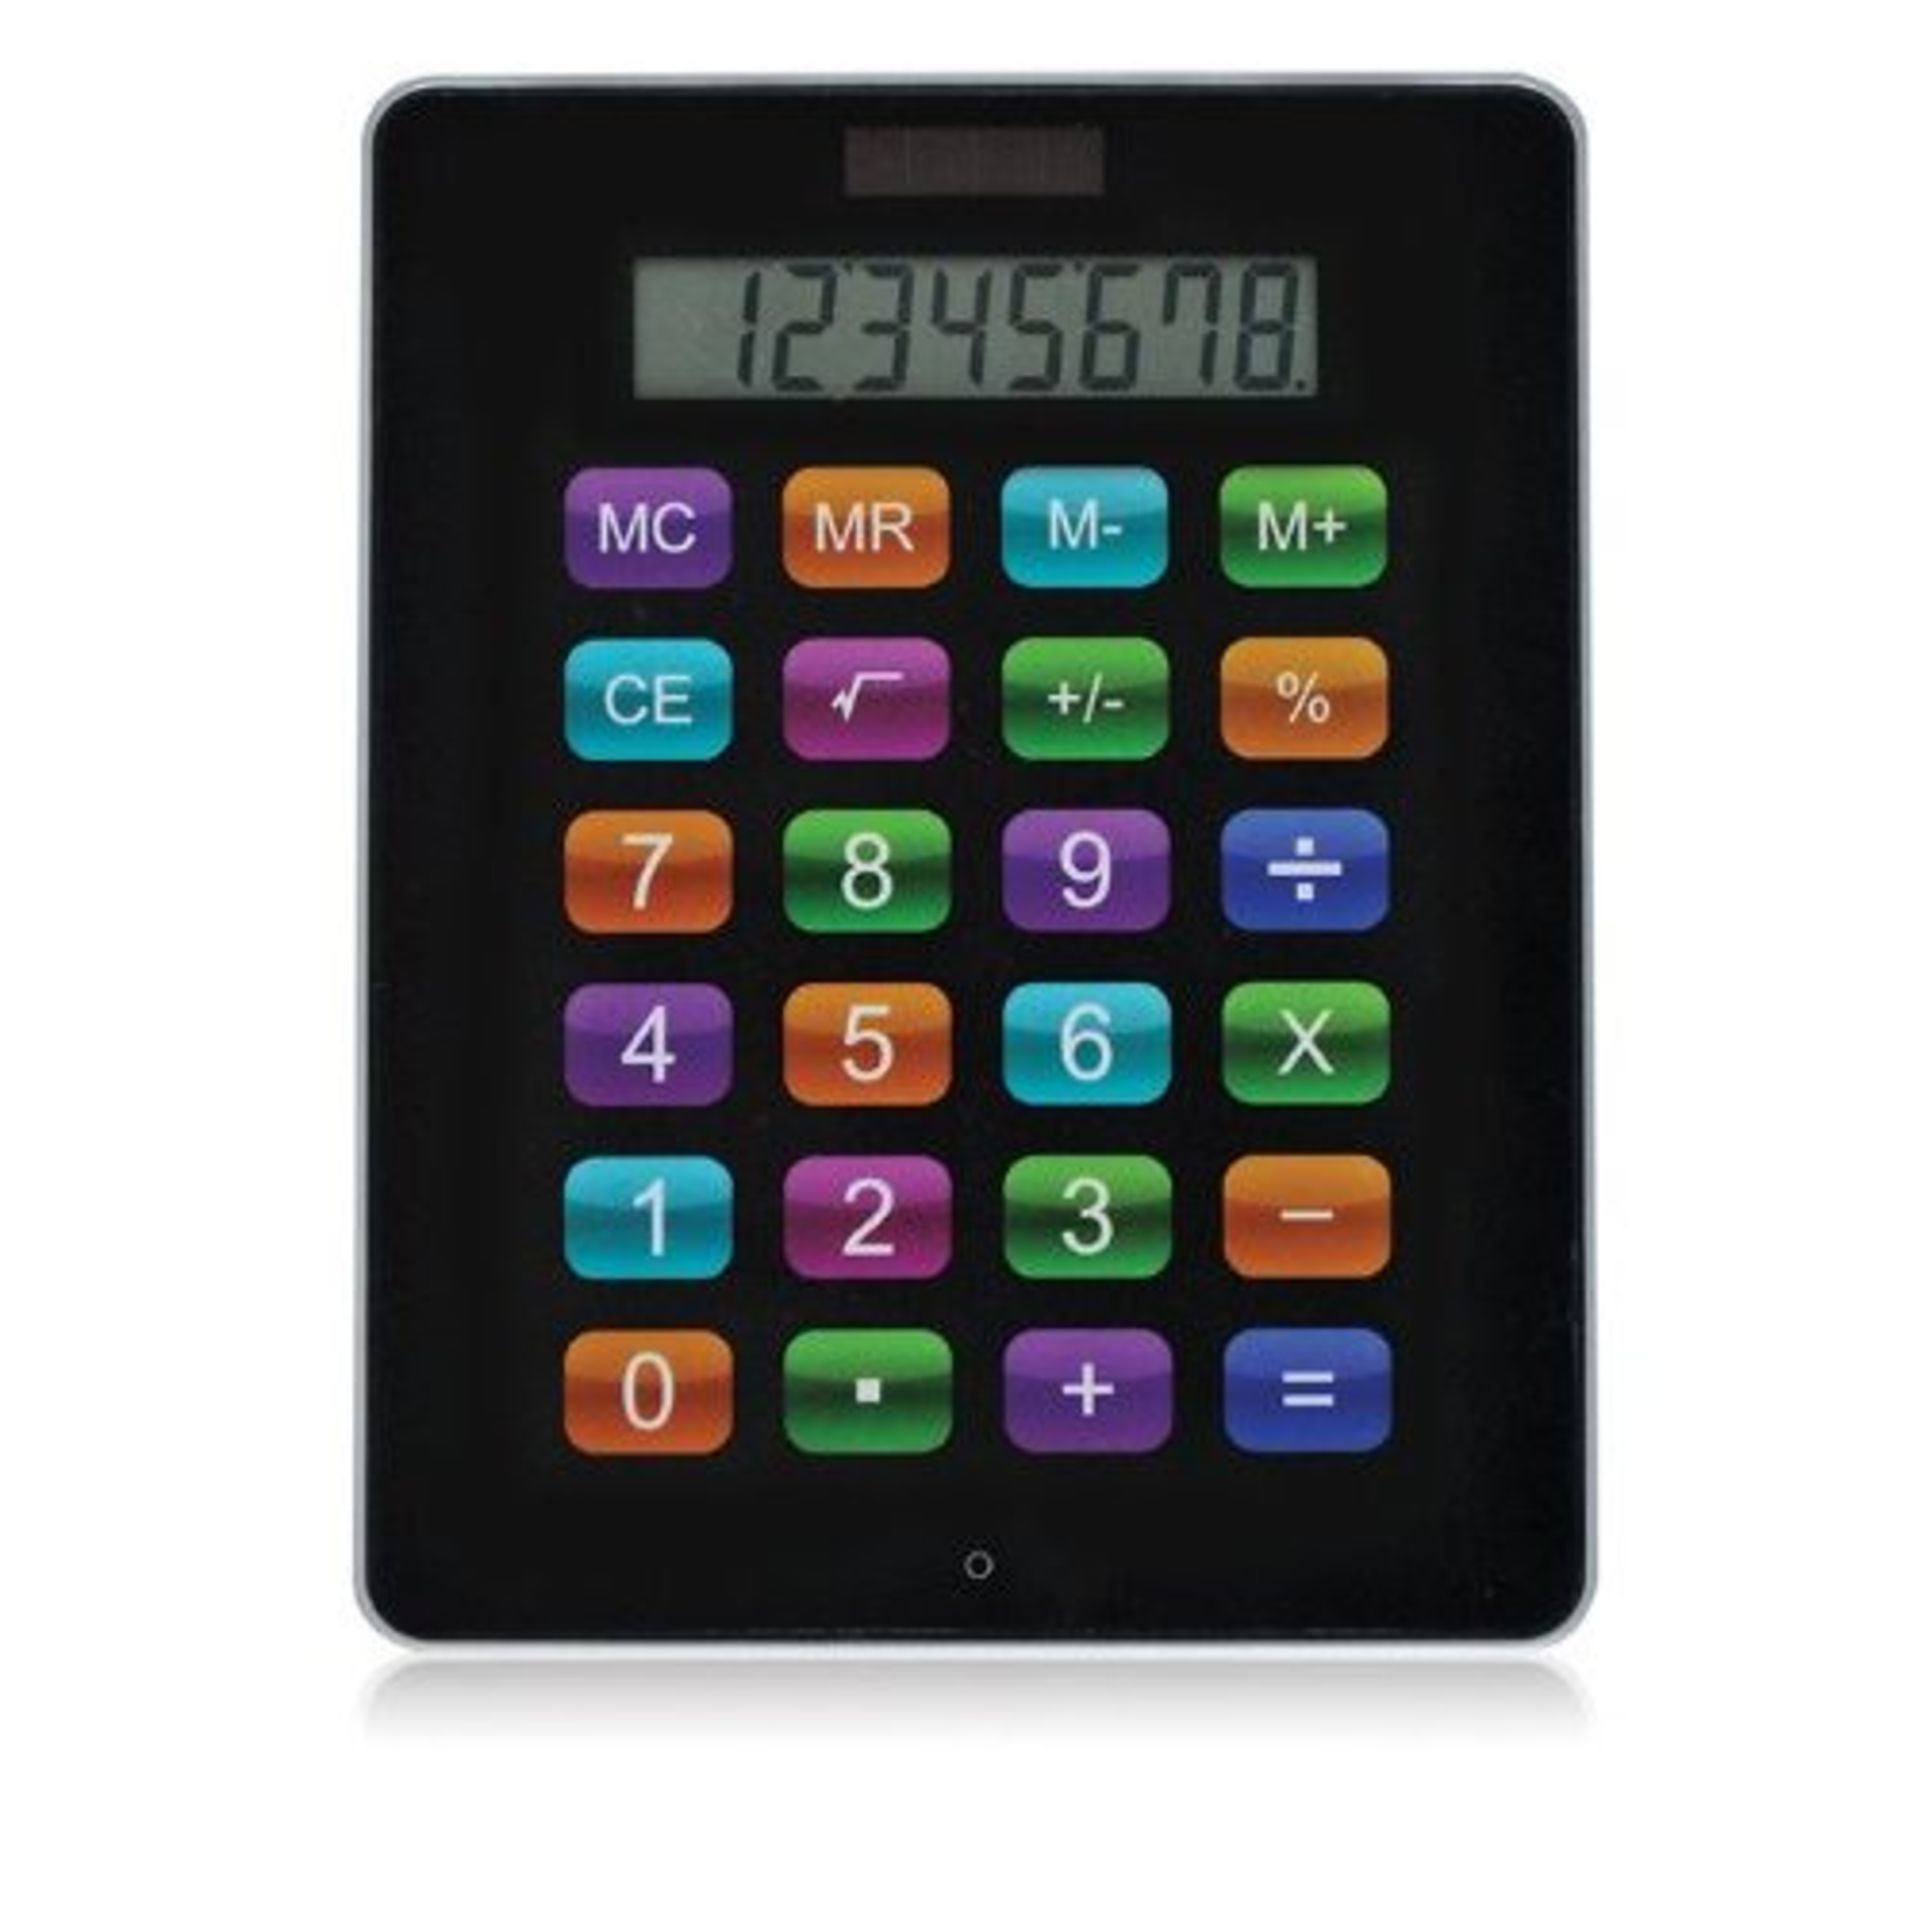 V Brand New Ipad Calculator-Battery powered with solar backup X 3 Bid price to be multiplied by - Image 3 of 4